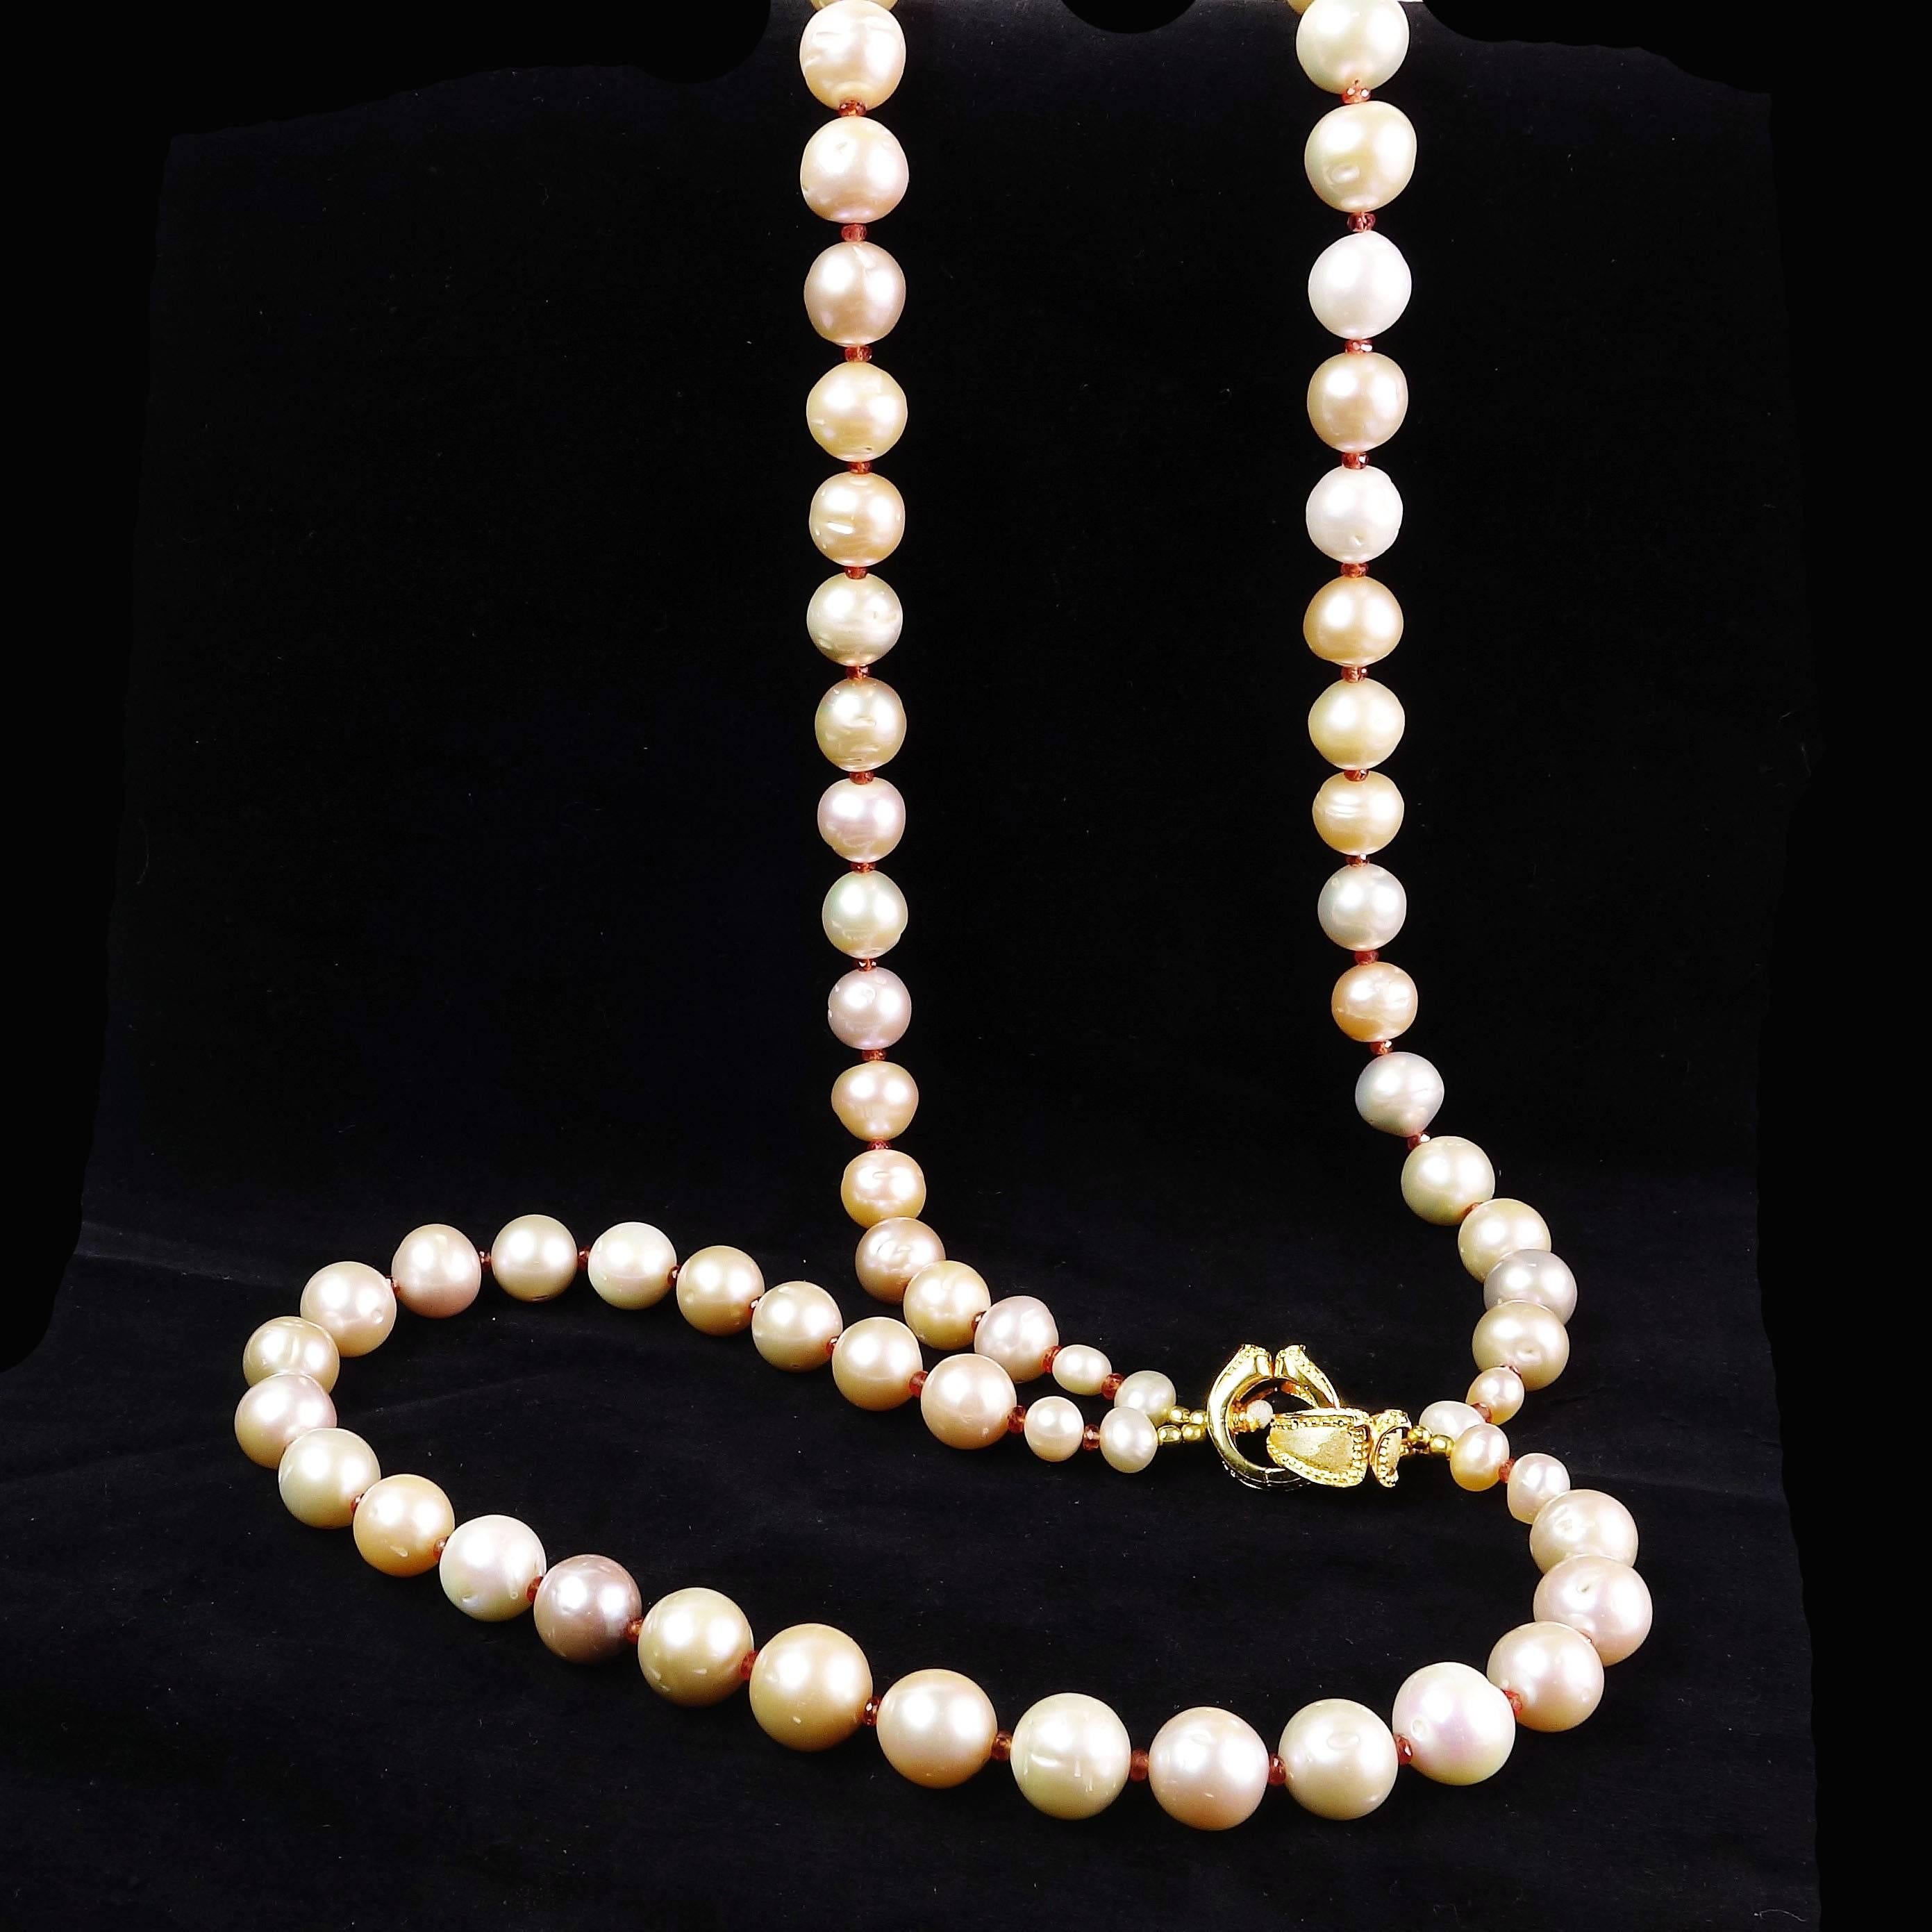 Artisan Two Strand Necklace of Lustrous Peachy Pearls & Orange Sapphires June Birthstone